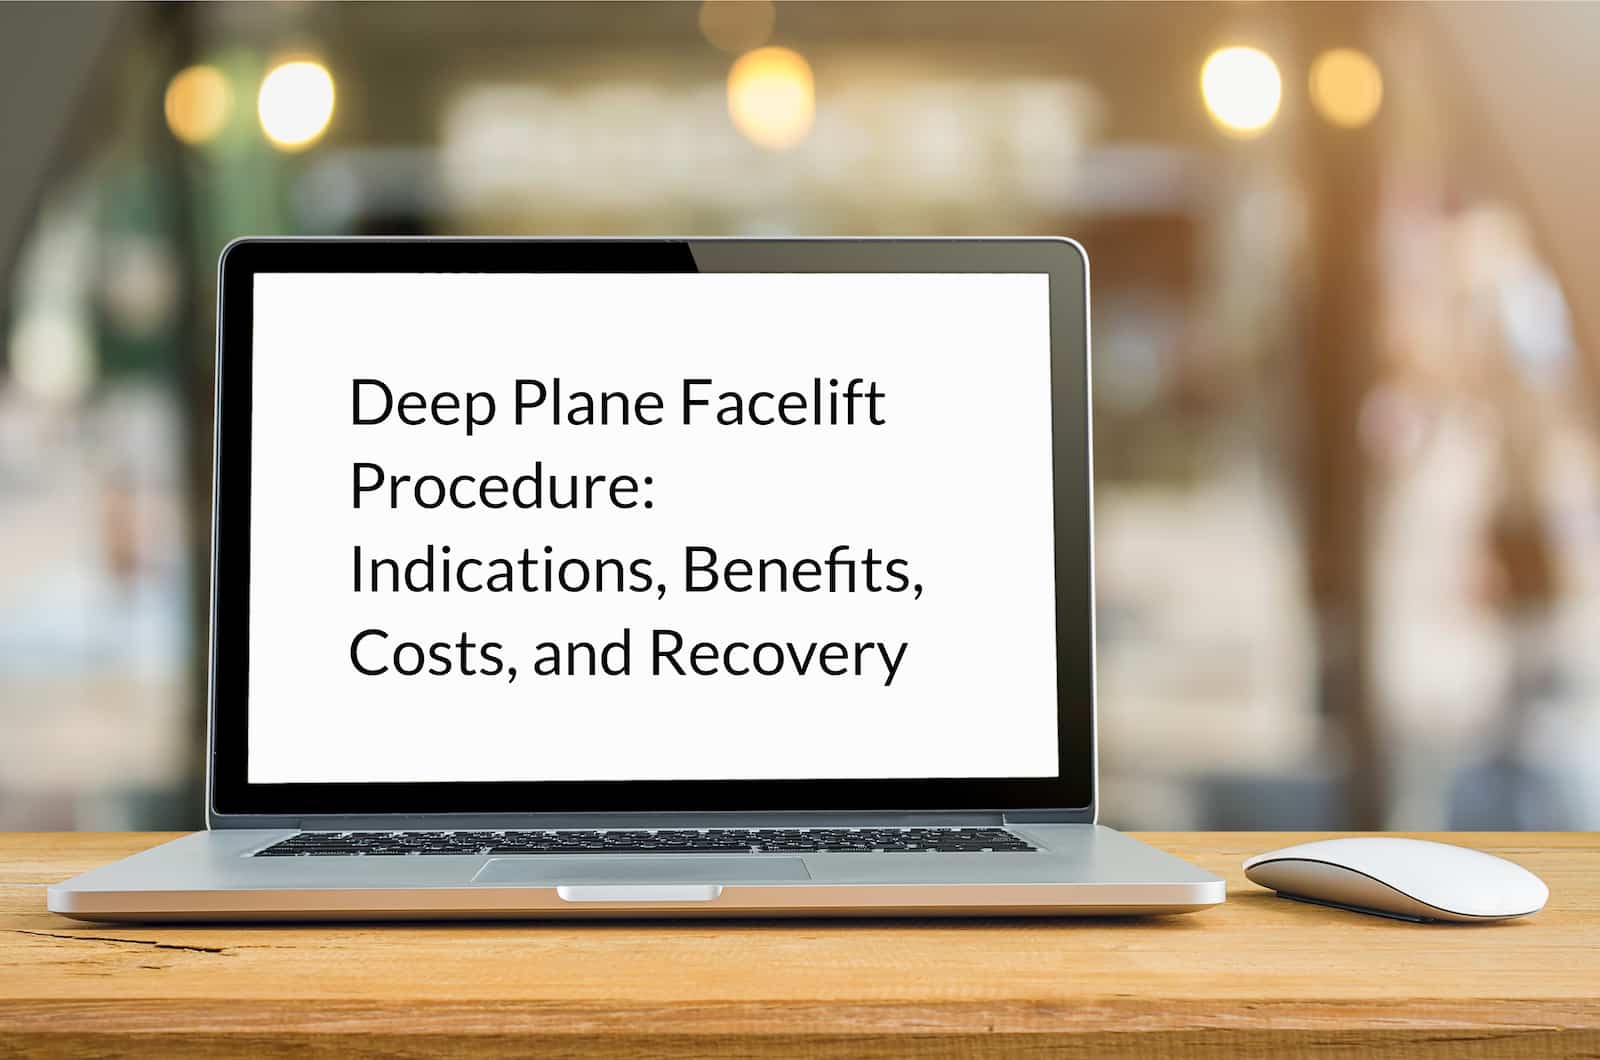 Deep Plane Facelift Procedure: Indications, Benefits, Costs, and Recovery